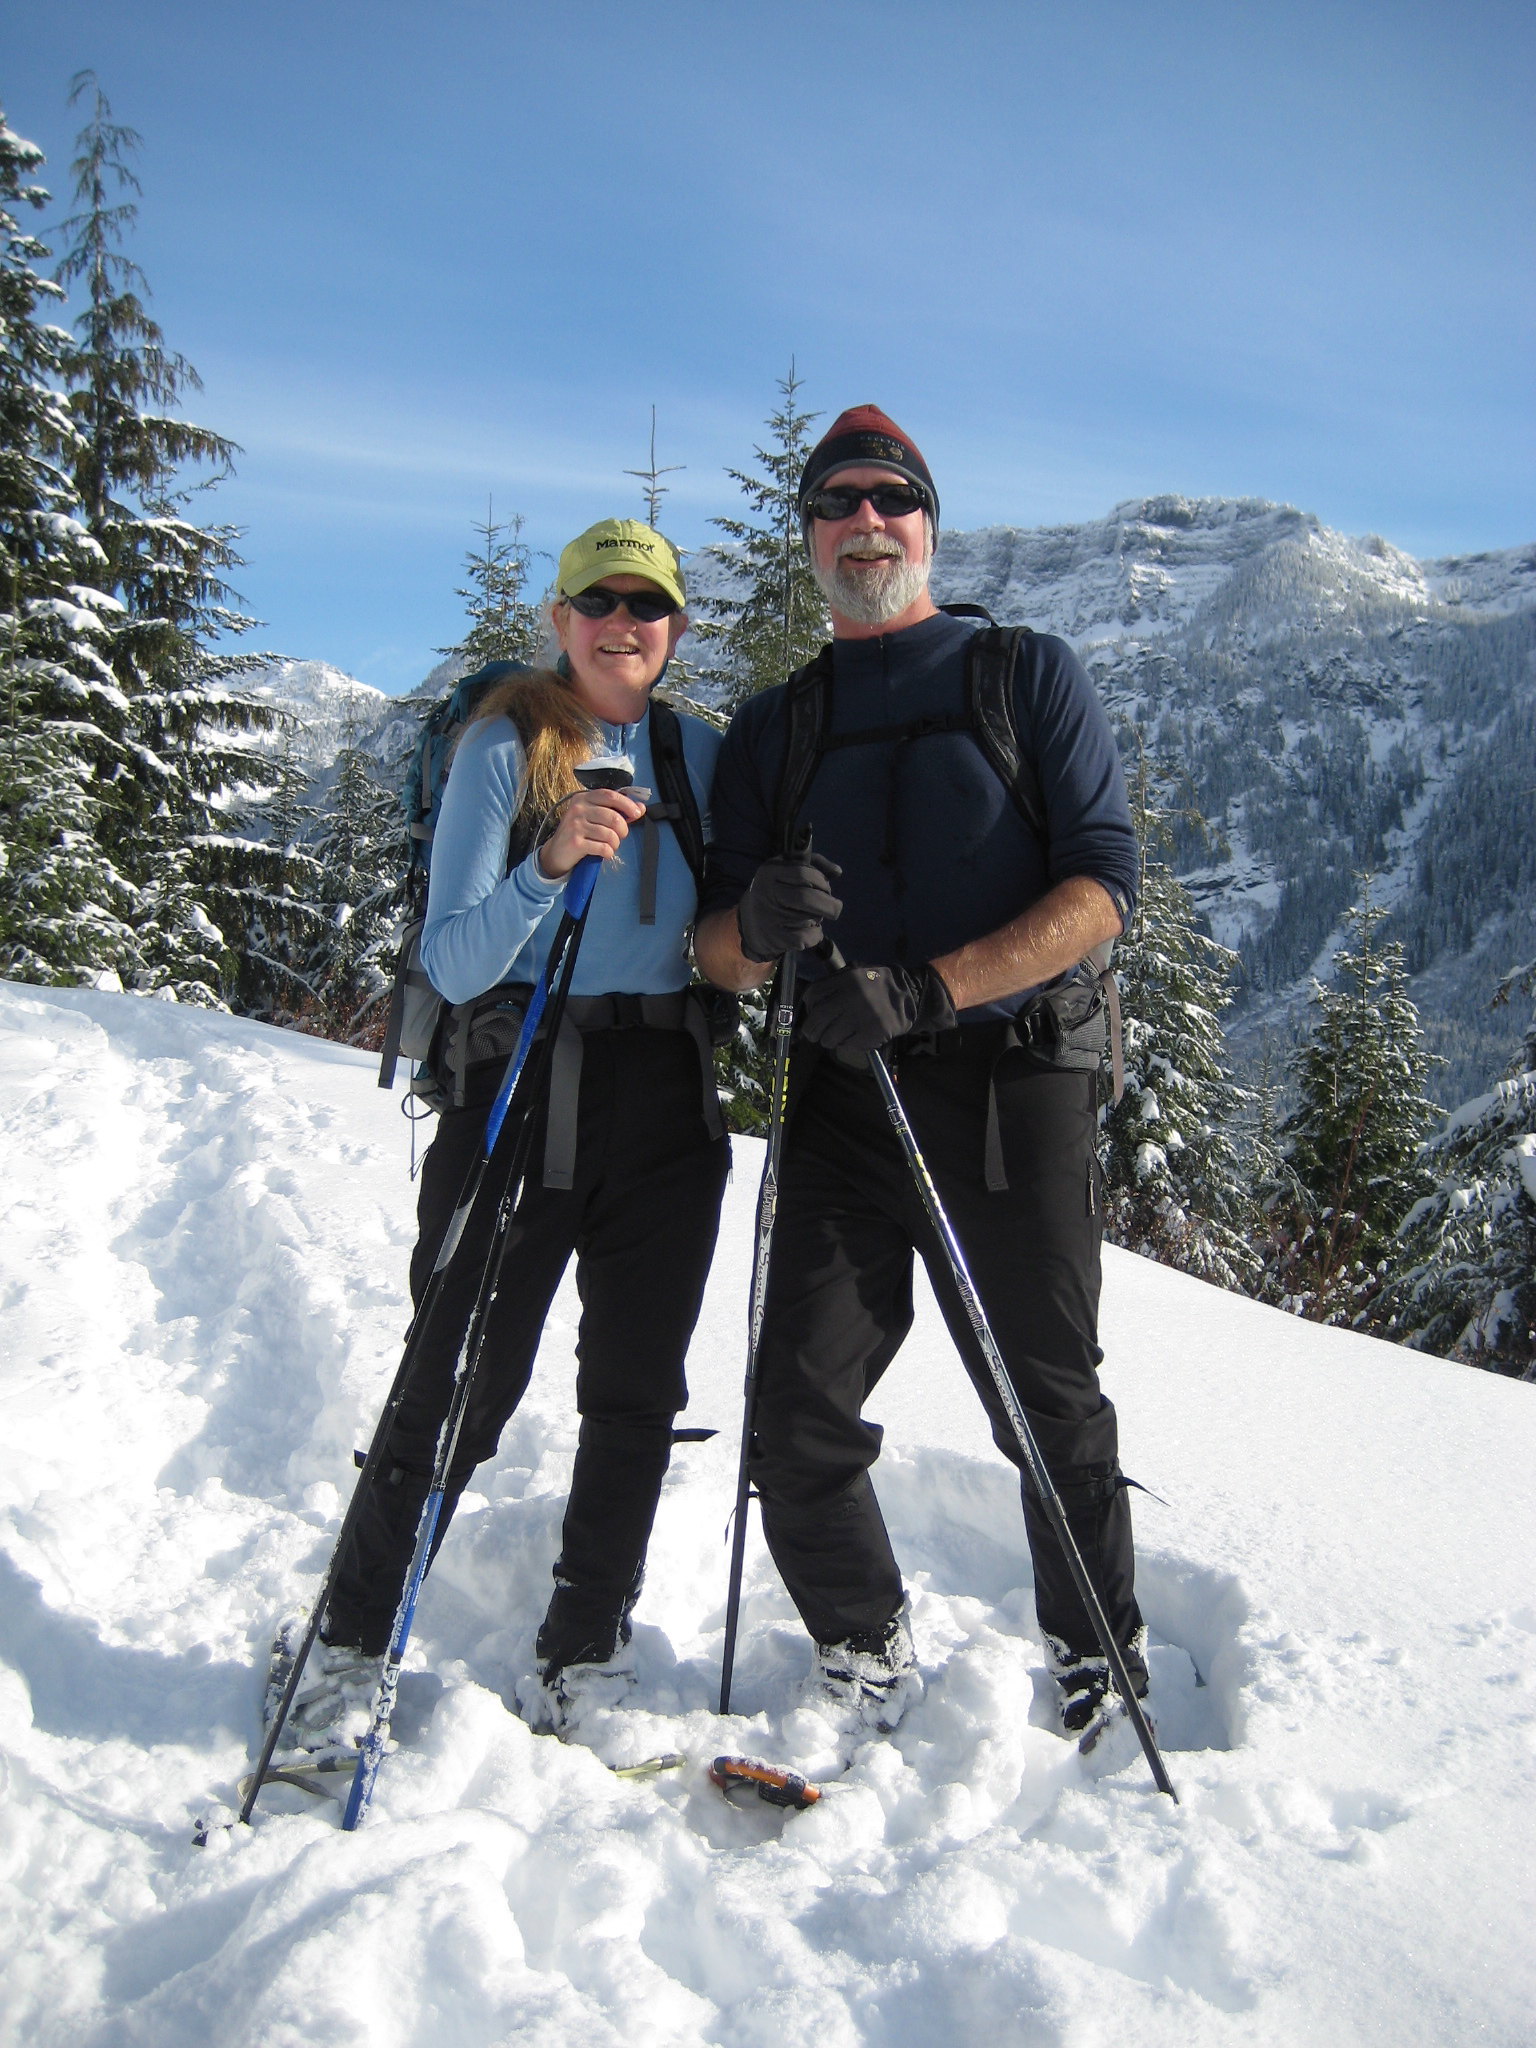 Snowshoeing in the Cascades